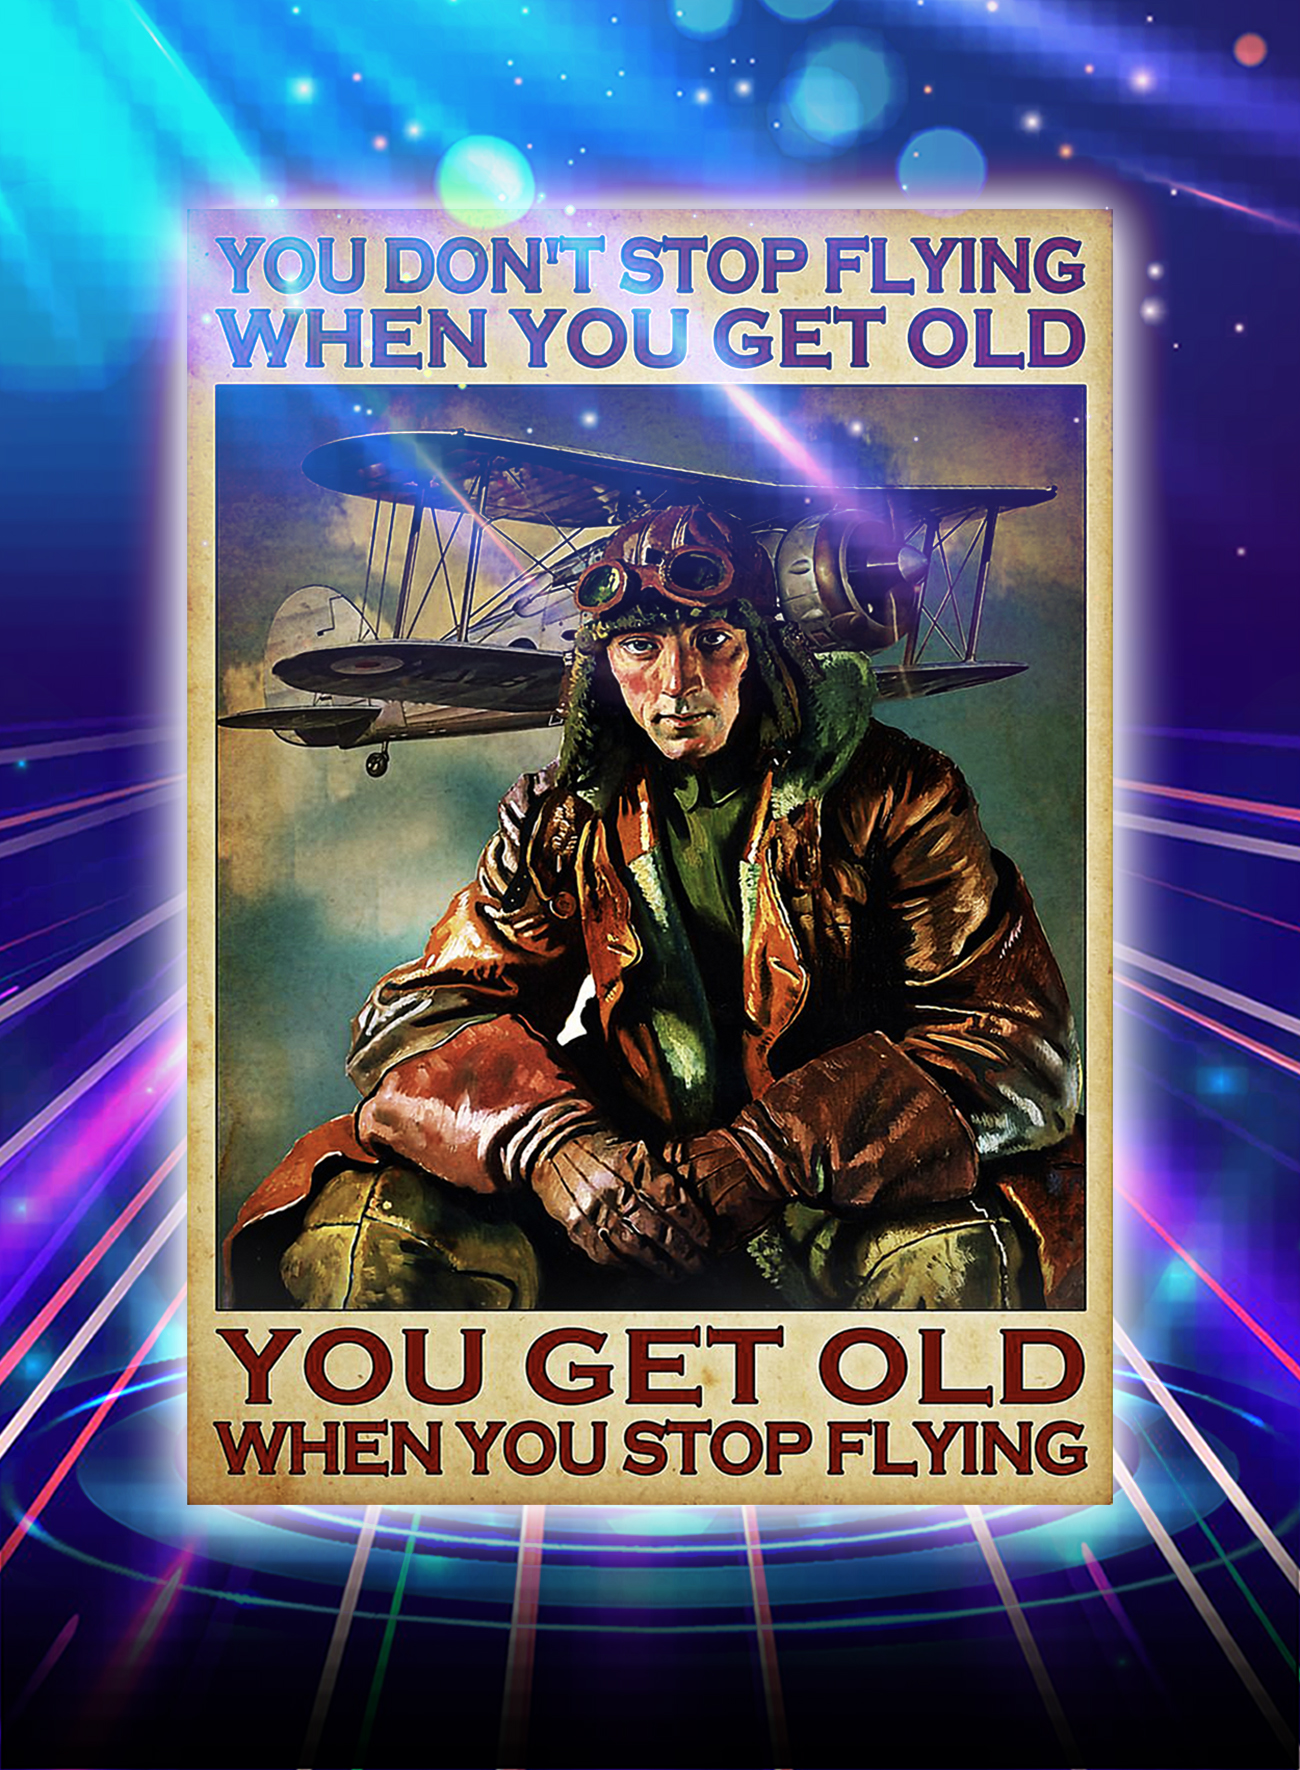 YOU DON'T STOP FLYING WHEN YOU GET OLD PILOT POSTER - A1